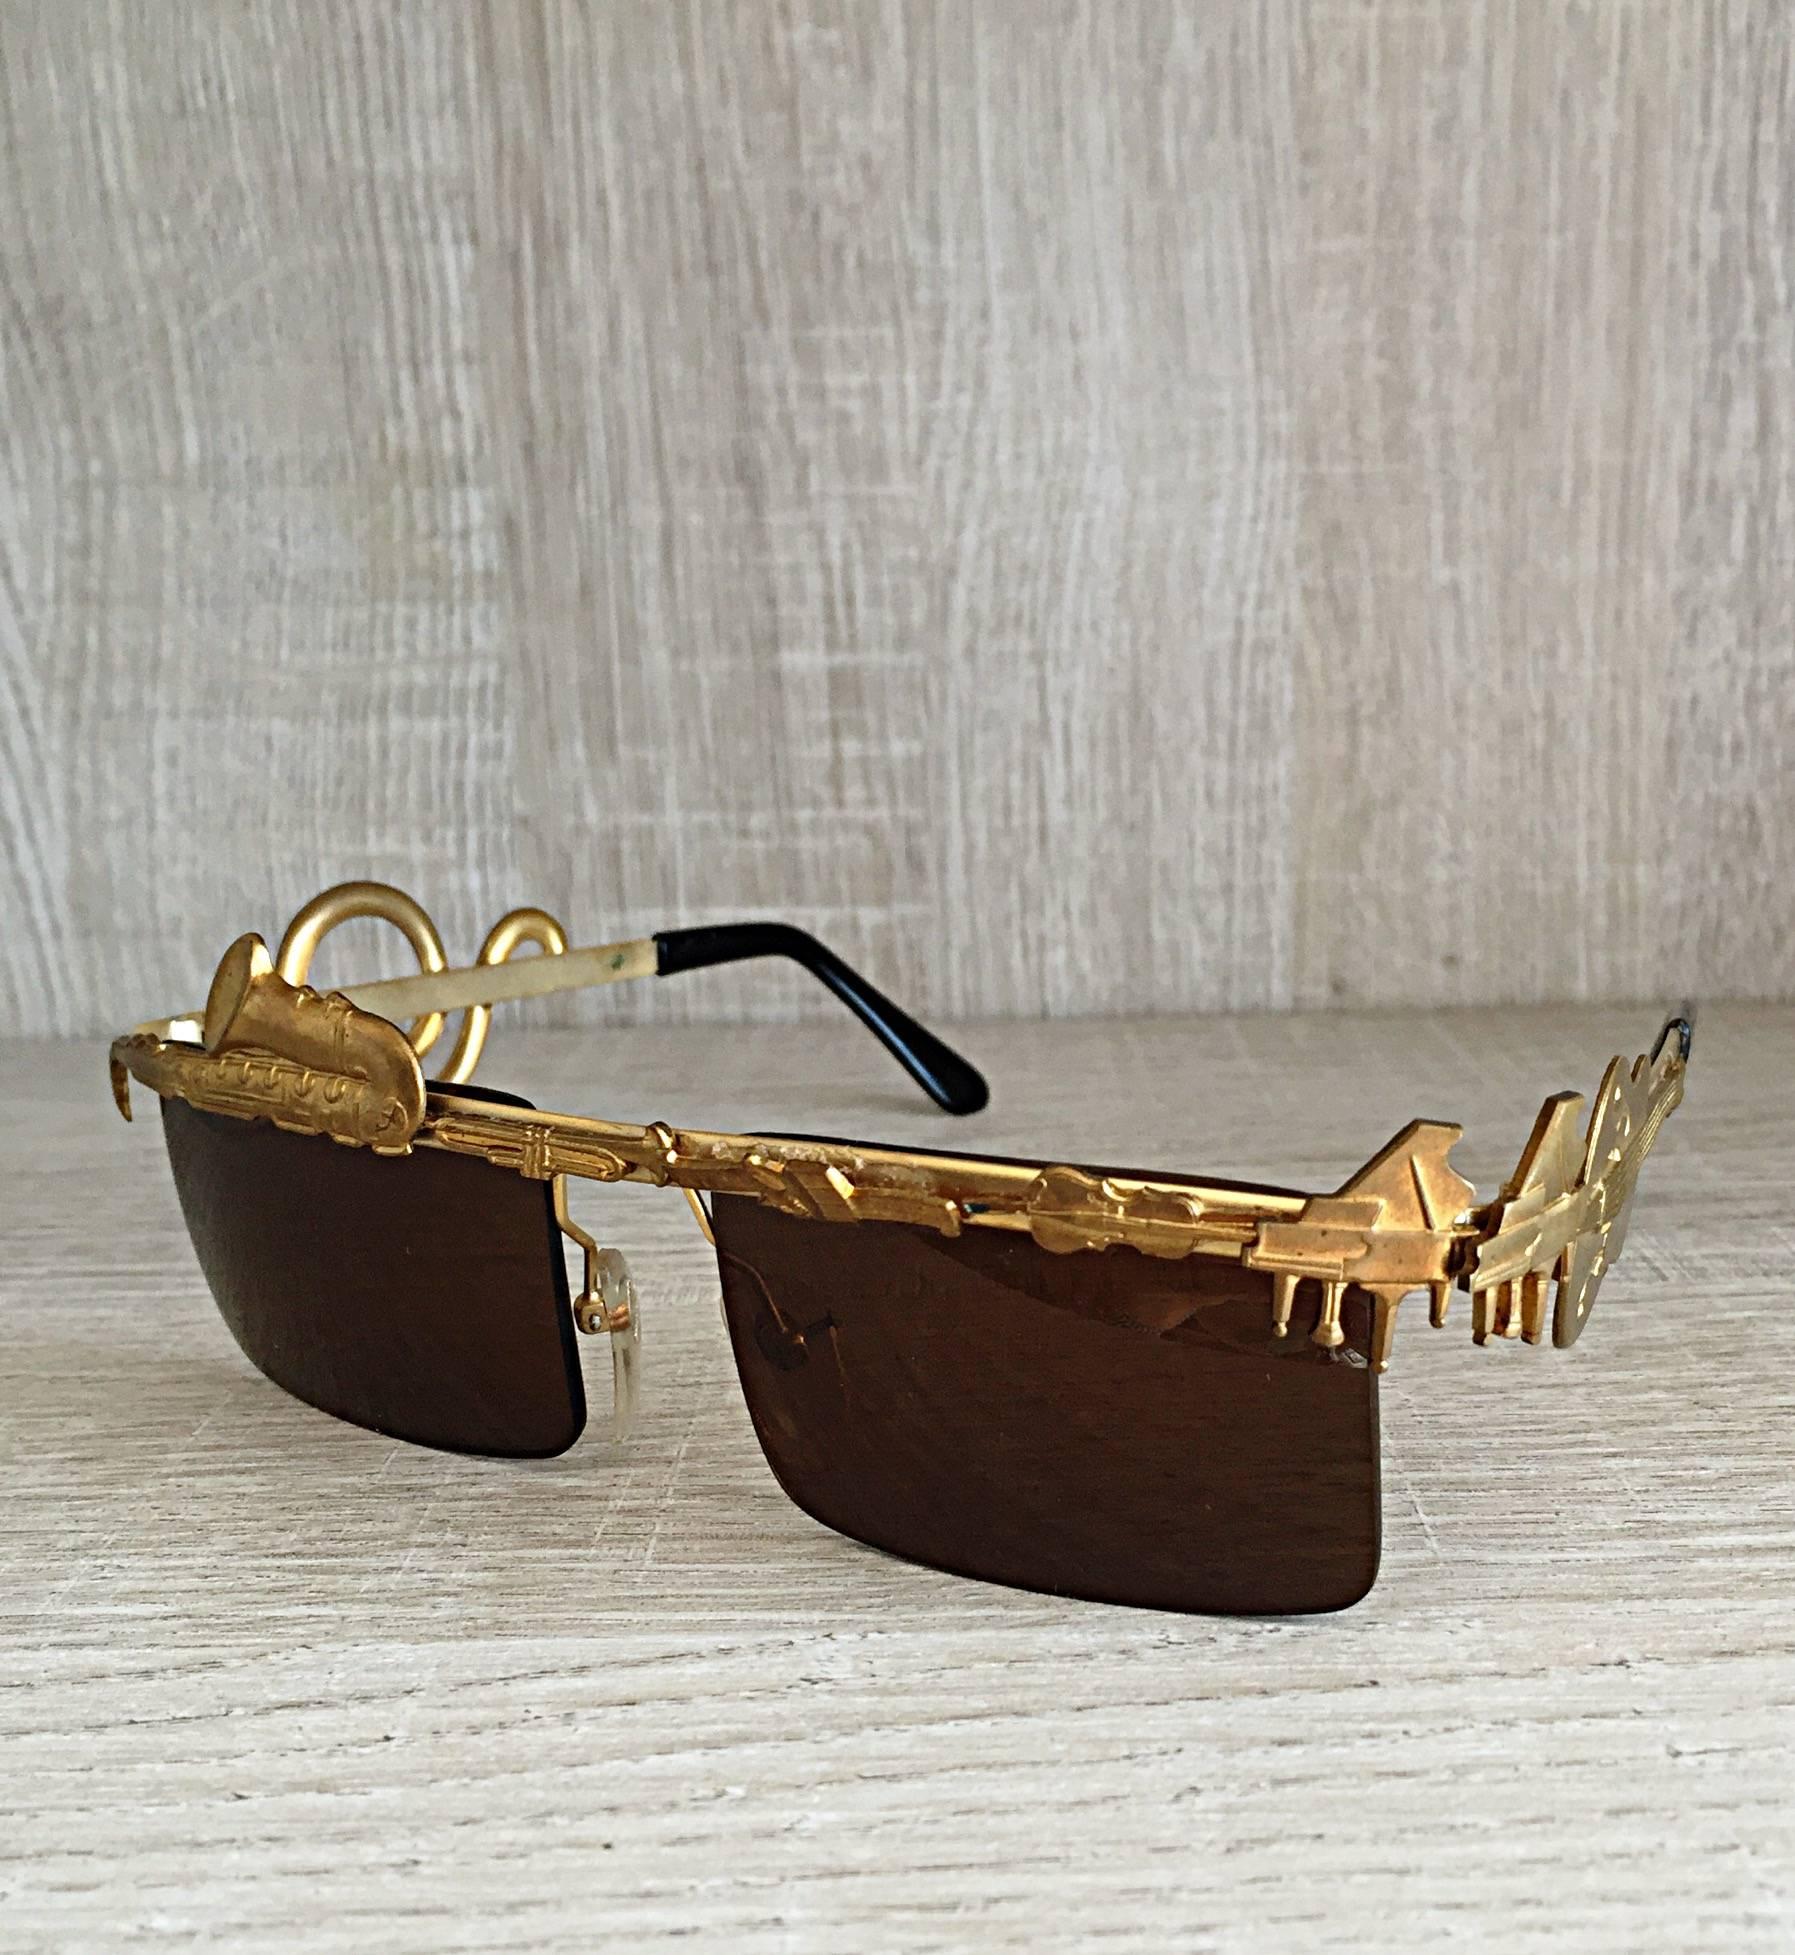 Rare, and absolutely amazing vintage MERCURA unisex sunglasses! These glasses feature an amazing amount of detail. Mercura was known for their unique designs, and superb quality! They are so hard to find, and this is my first pair to ever own!